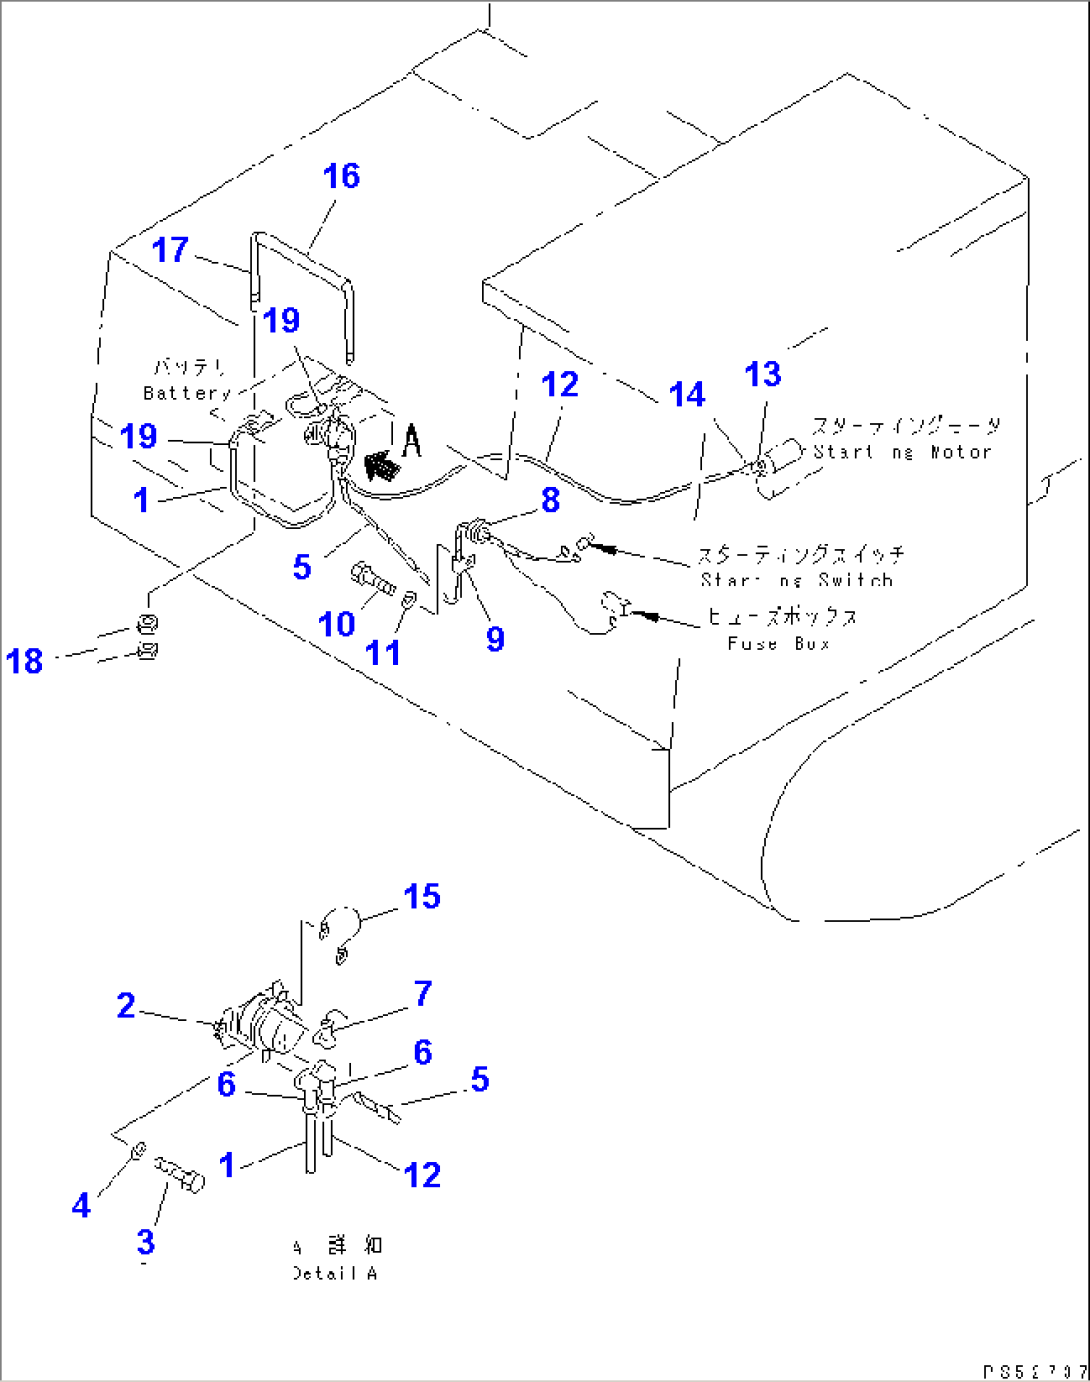 ELECTRICAL SYSTEM (BATTERY AND RELAY)(#1011-1015)